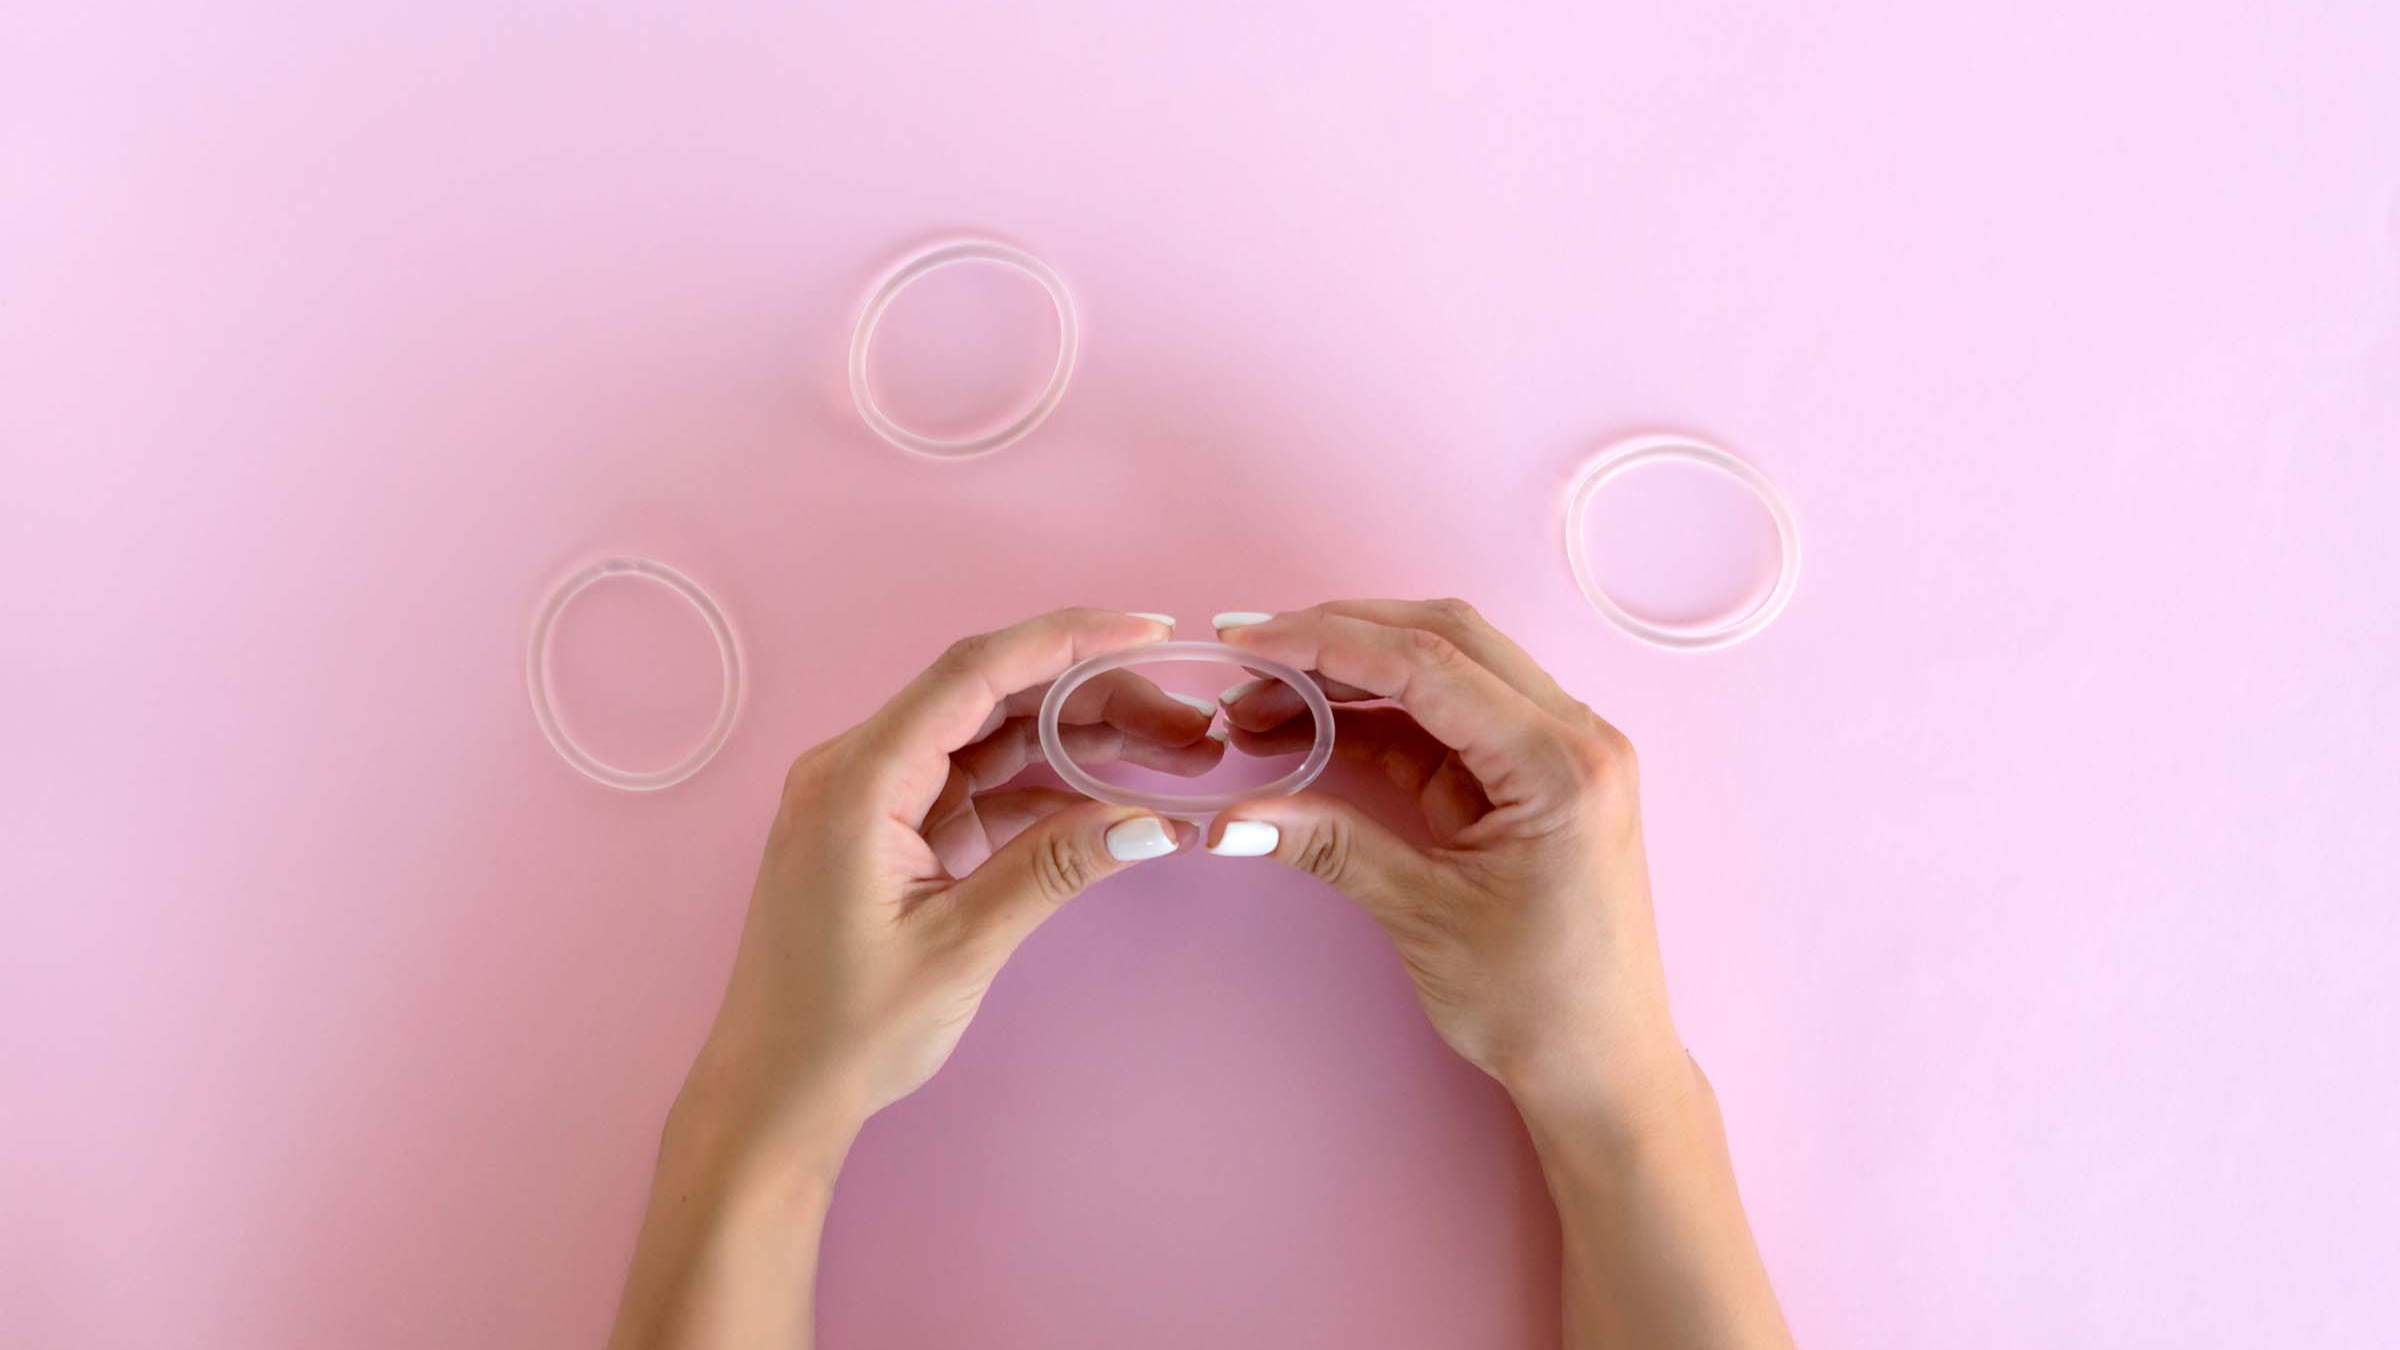 FDA Approves Annovera, a New Birth Control Ring That Lasts for a Year